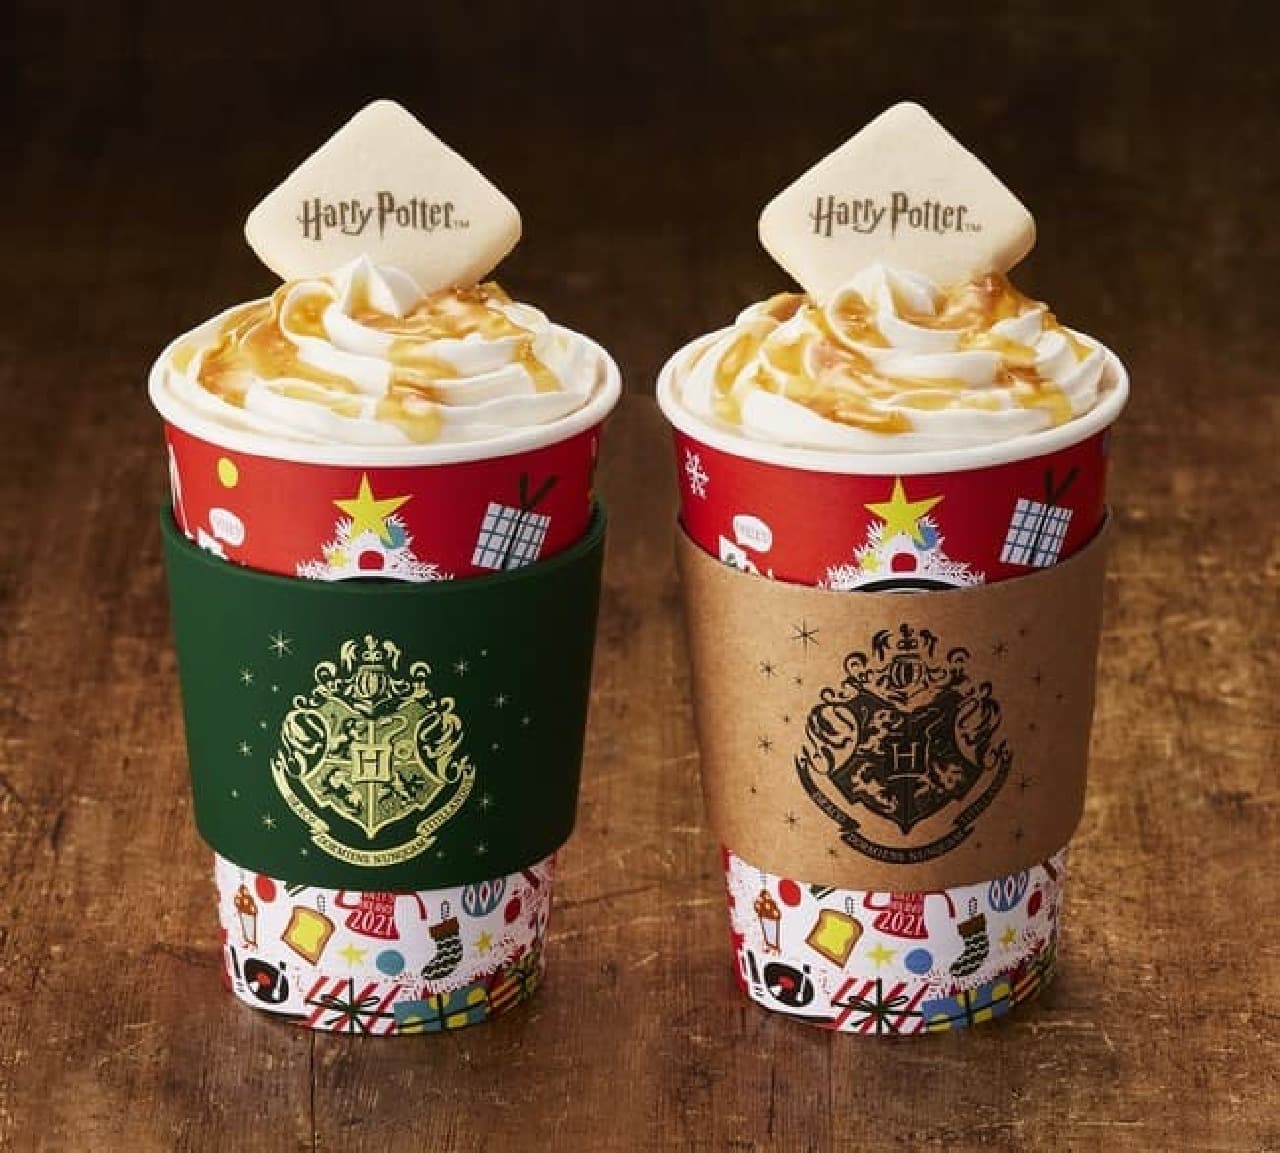 Collaboration between Tully's and Harry Potter! Beverages, foods, mugs, etc. that invite you to the magical world